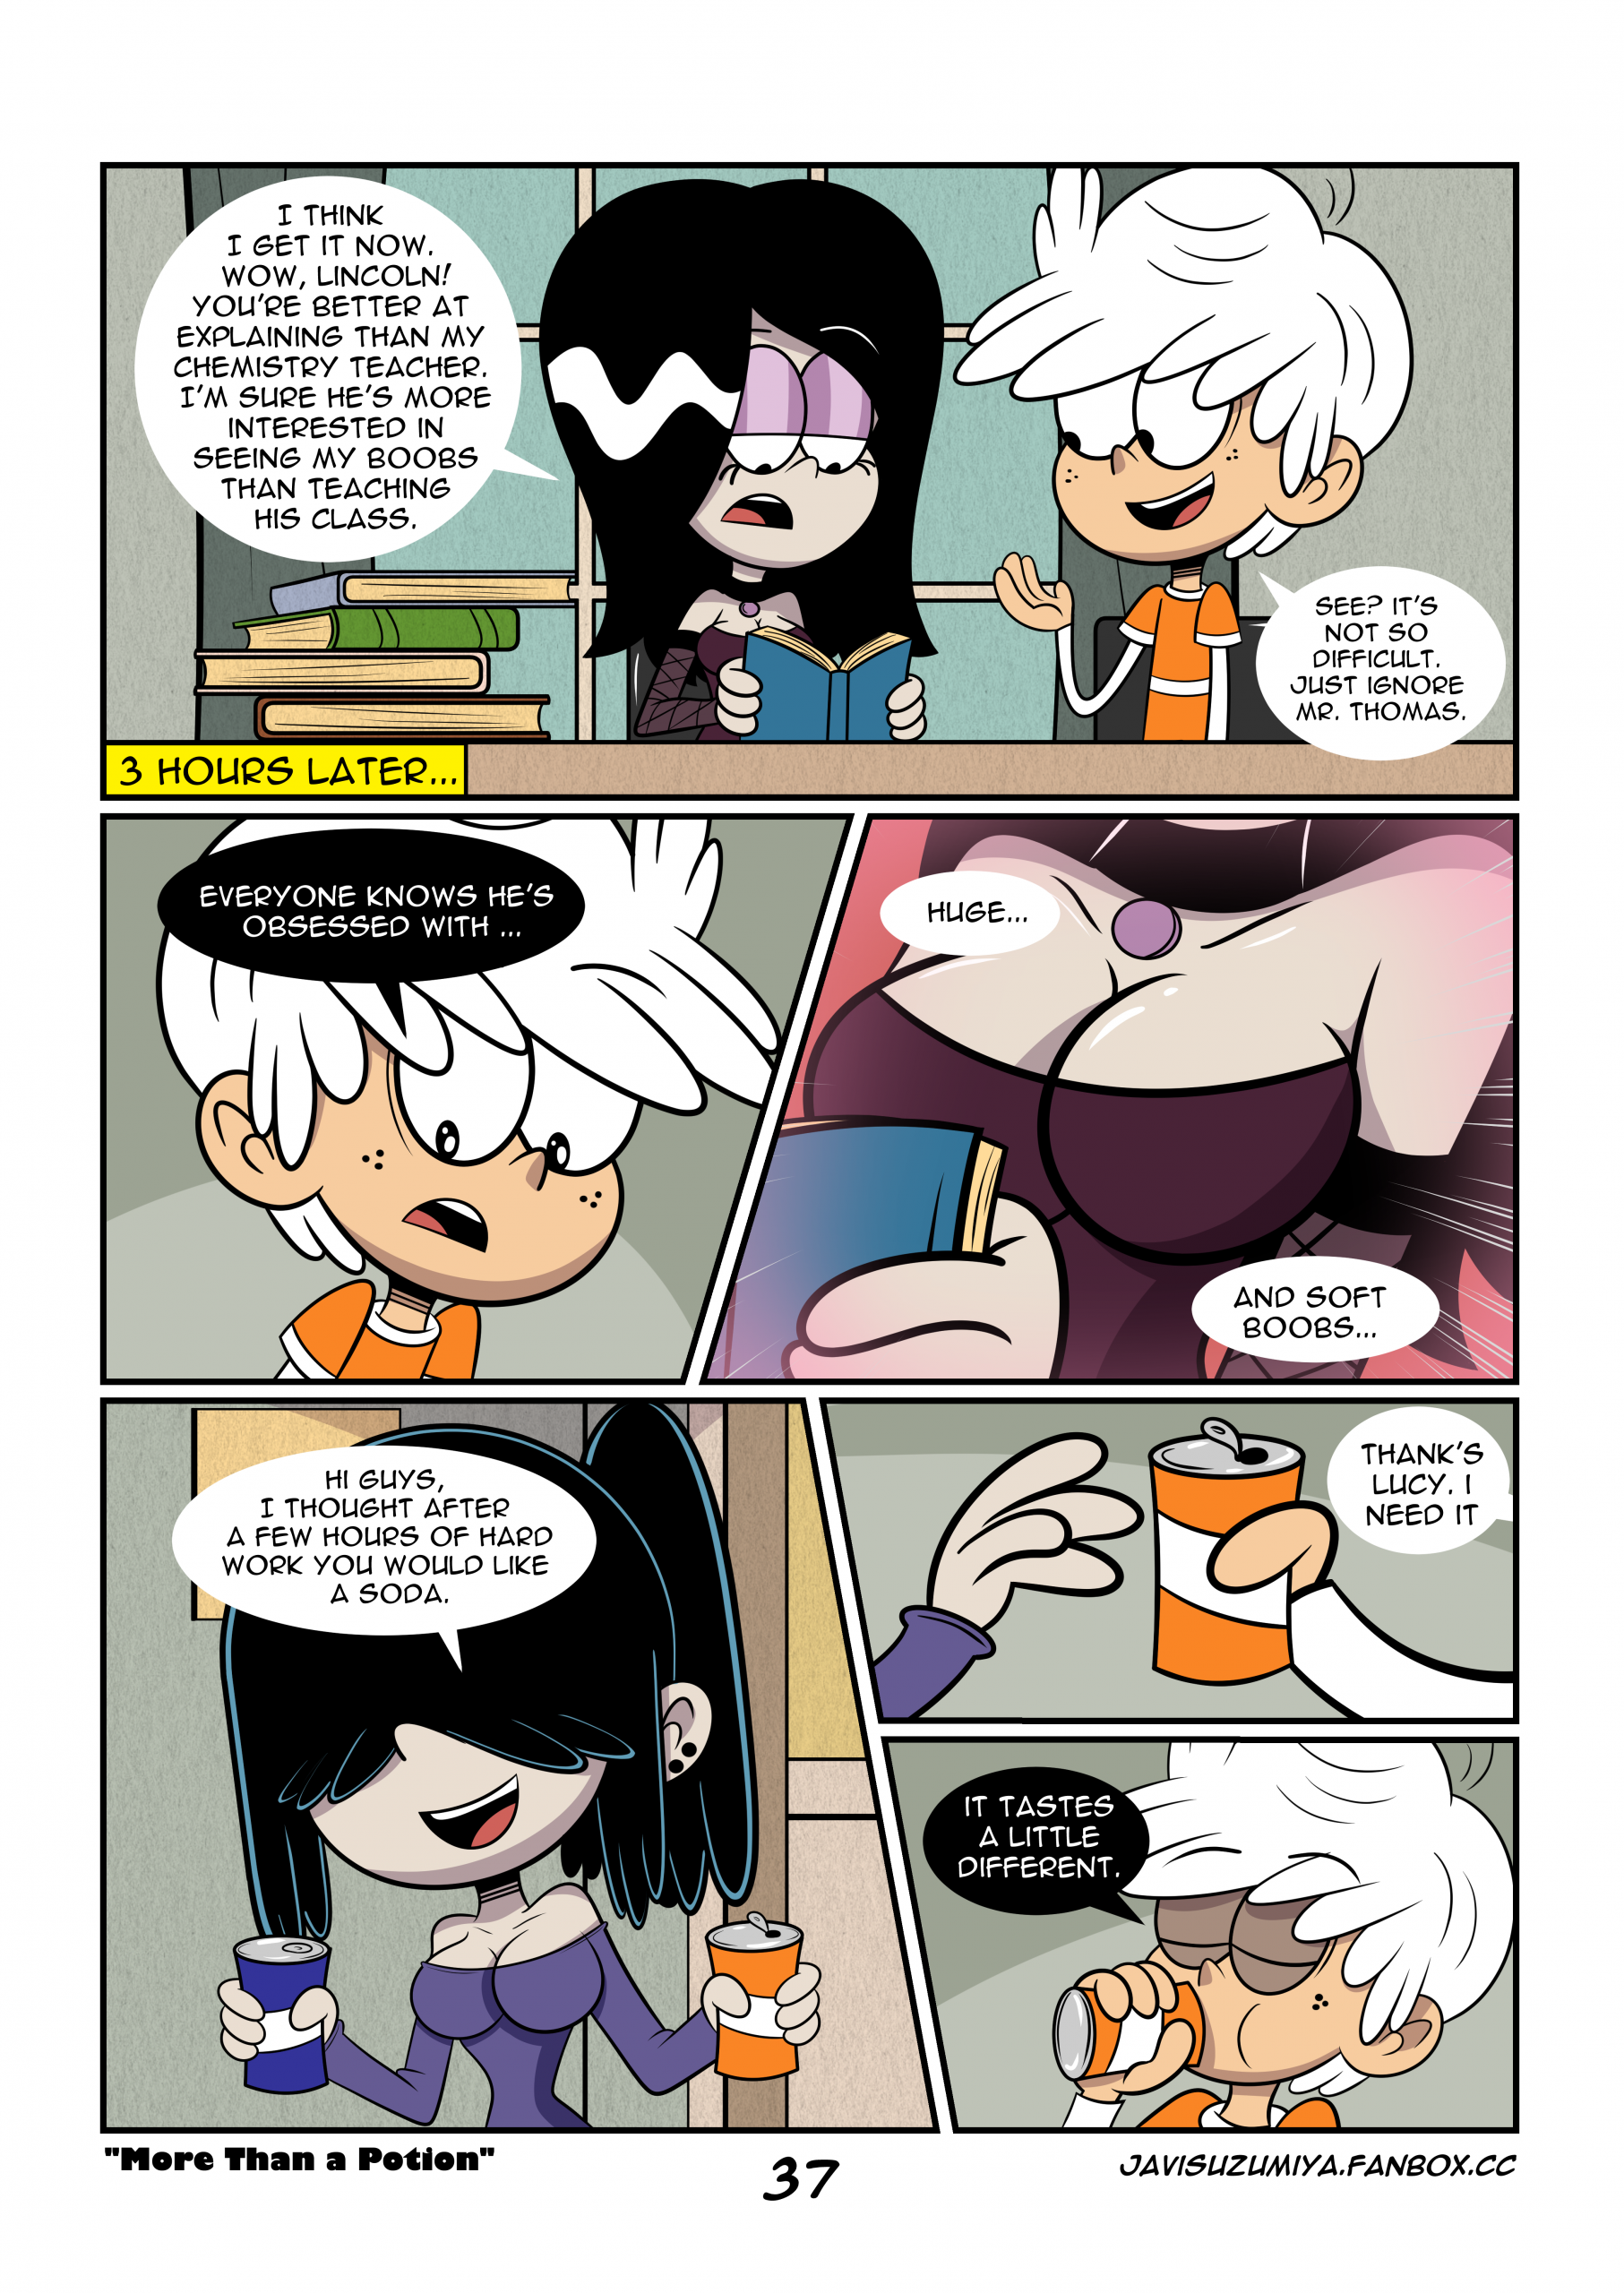 More Than a Potion porn comic picture 38